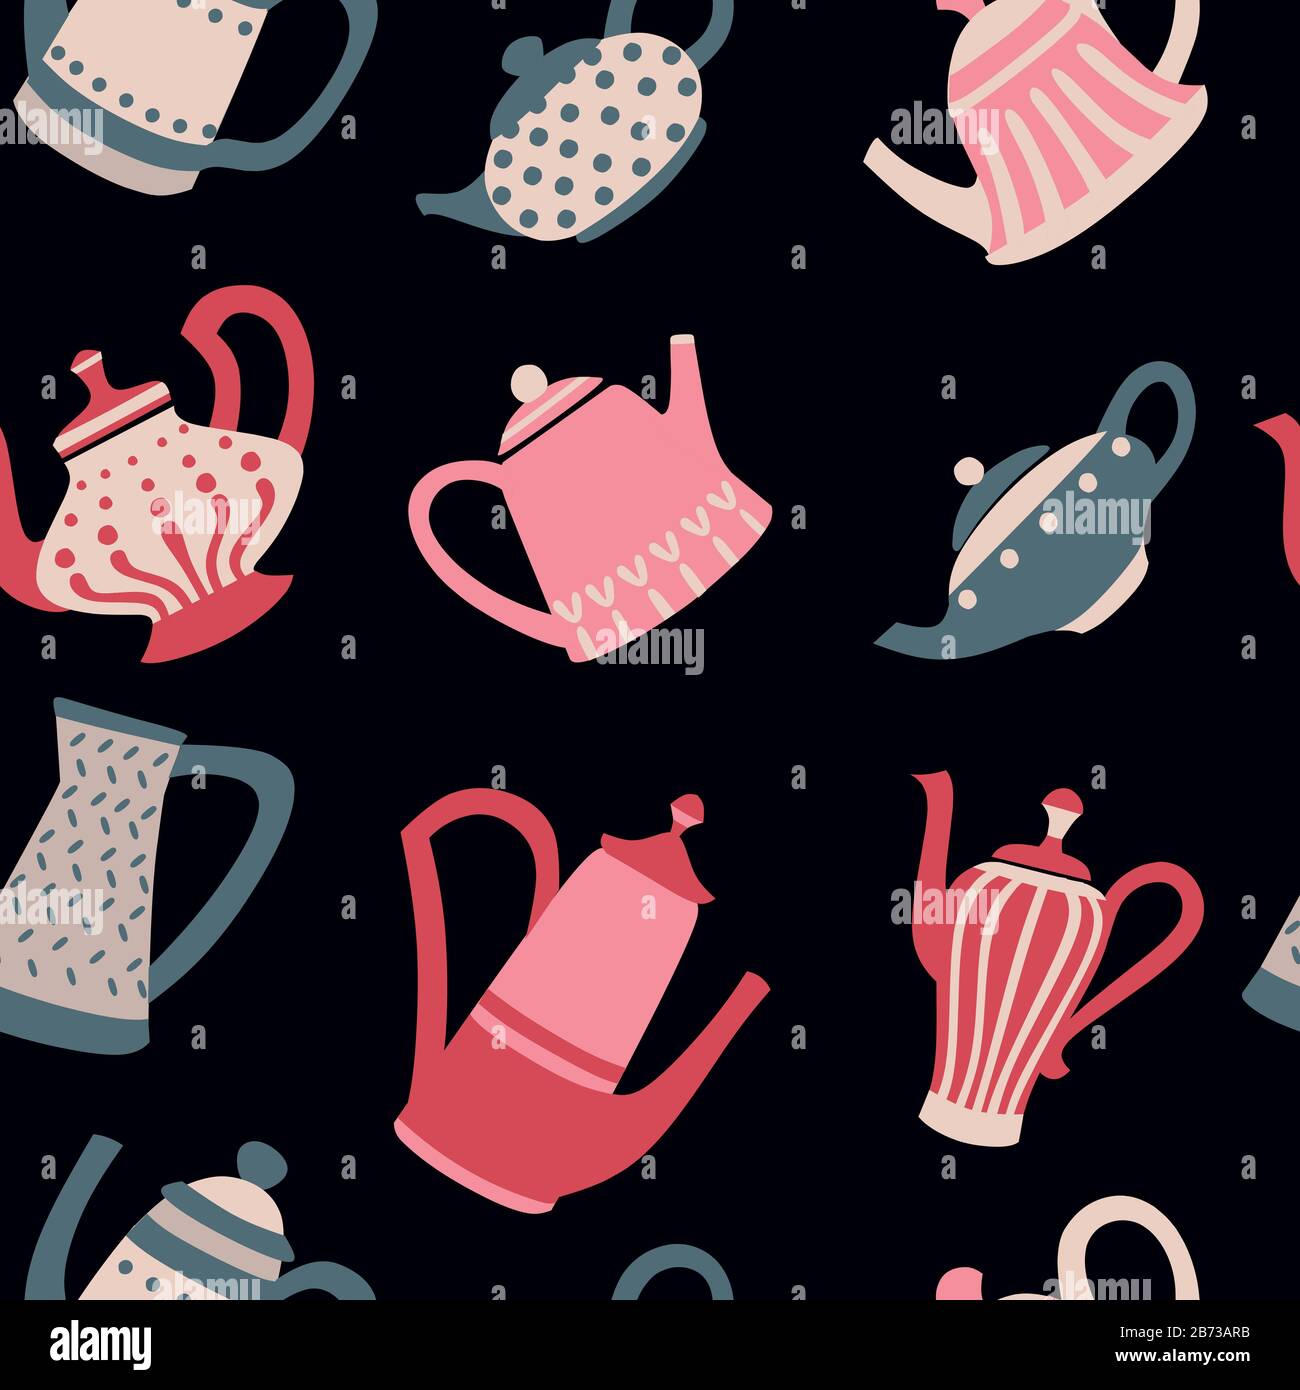 Seamless pattern of colored teapots flat vector illustration on dark background. Stock Vector